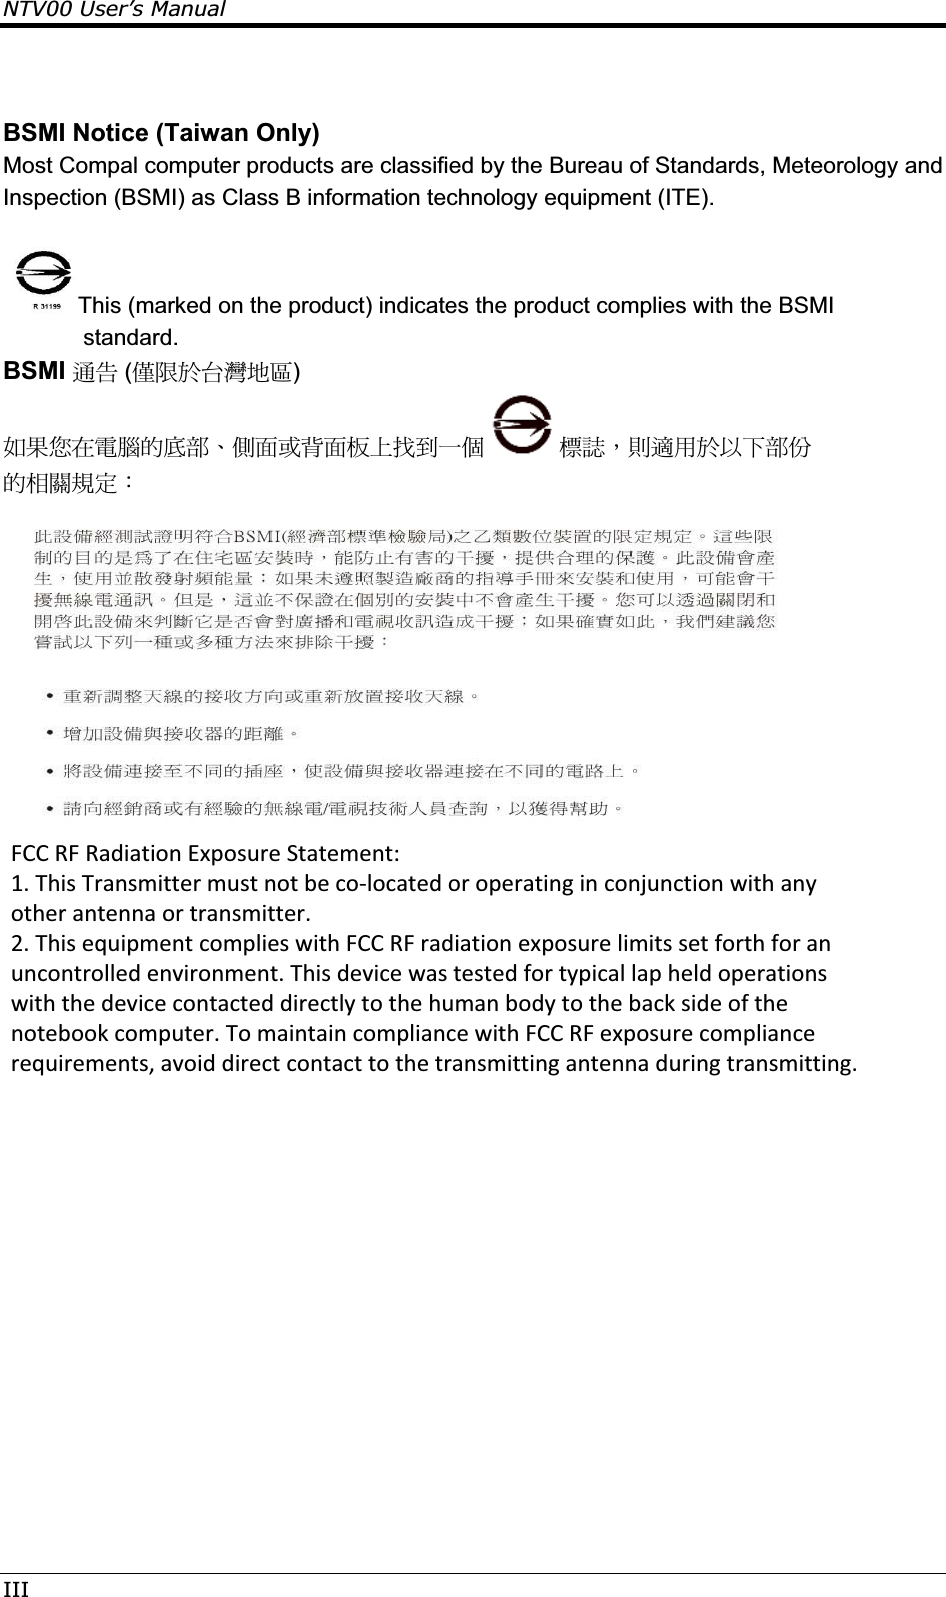 NTV00 User’s ManualIIIBSMI Notice (Taiwan Only) Most Compal computer products are classified by the Bureau of Standards, Meteorology and Inspection (BSMI) as Class B information technology equipment (ITE).  This (marked on the product) indicates the product complies with the BSMI standard. BSMI ຏܫ (ႛૻ࣍؀᨜چ೴) ڕ࣠൞ڇሽᆰऱࢍຝΕೡ૿ࢨહ૿ࣨՂބࠩԫଡ ᑑ፾Δঞᔞش࣍אՀຝٝ ऱઌᣂ๵ࡳΚ  FCC RF Radiation Exposure Statement:   1. This Transmitter must not be co-located or operating in conjunction with any other antenna or transmitter.  2. This equipment complies with FCC RF radiation exposure limits set forth for an uncontrolled environment. This device was tested for typical lap held operations with the device contacted directly to the human body to the back side of the notebook computer. To maintain compliance with FCC RF exposure compliance requirements, avoid direct contact to the transmitting antenna during transmitting.